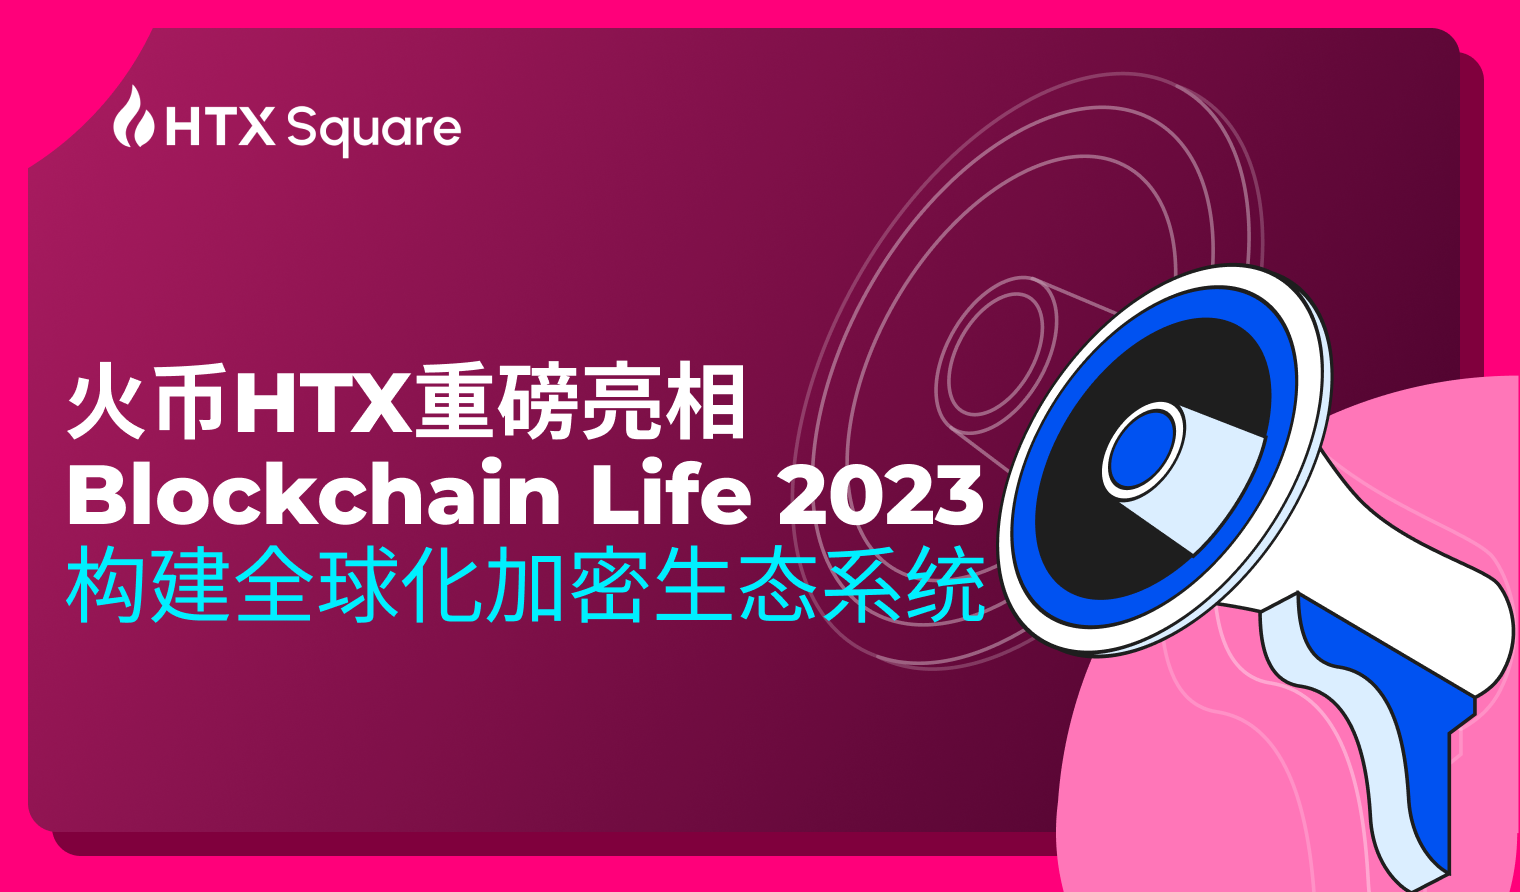 HTX Shines at Blockchain Life 2023, Paving the Way for a Global Crypto Ecosystem